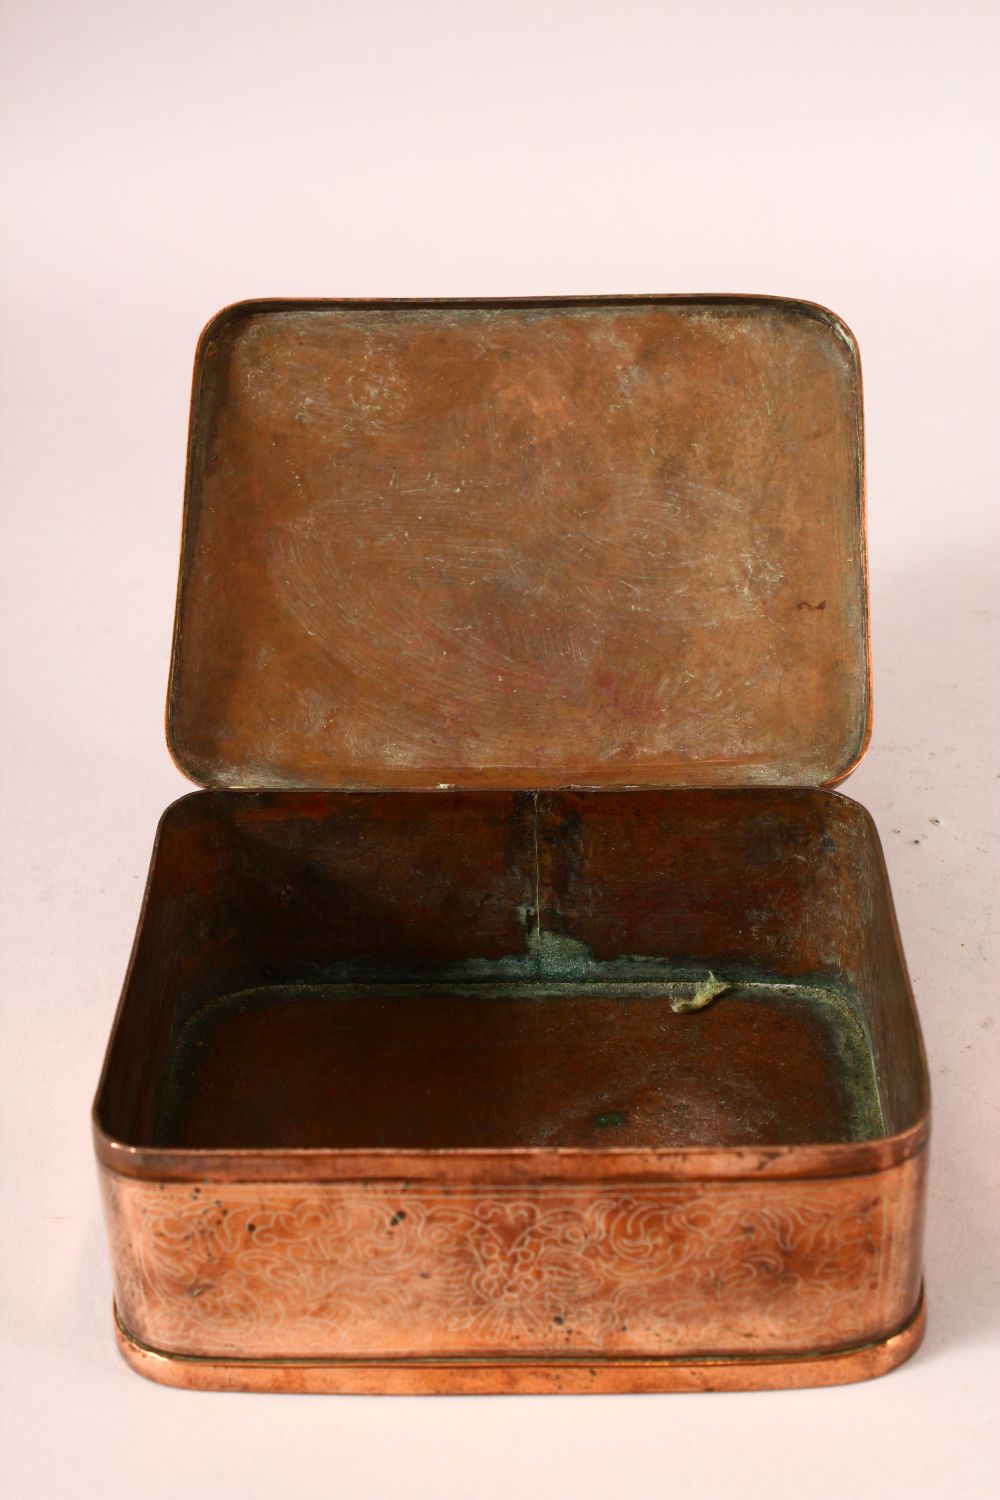 A FINE 19TH CENTURY SRI LANKAN OR BURMESE SILVER INLAID COPPER BOX - decorated with silver inlay - Image 6 of 7